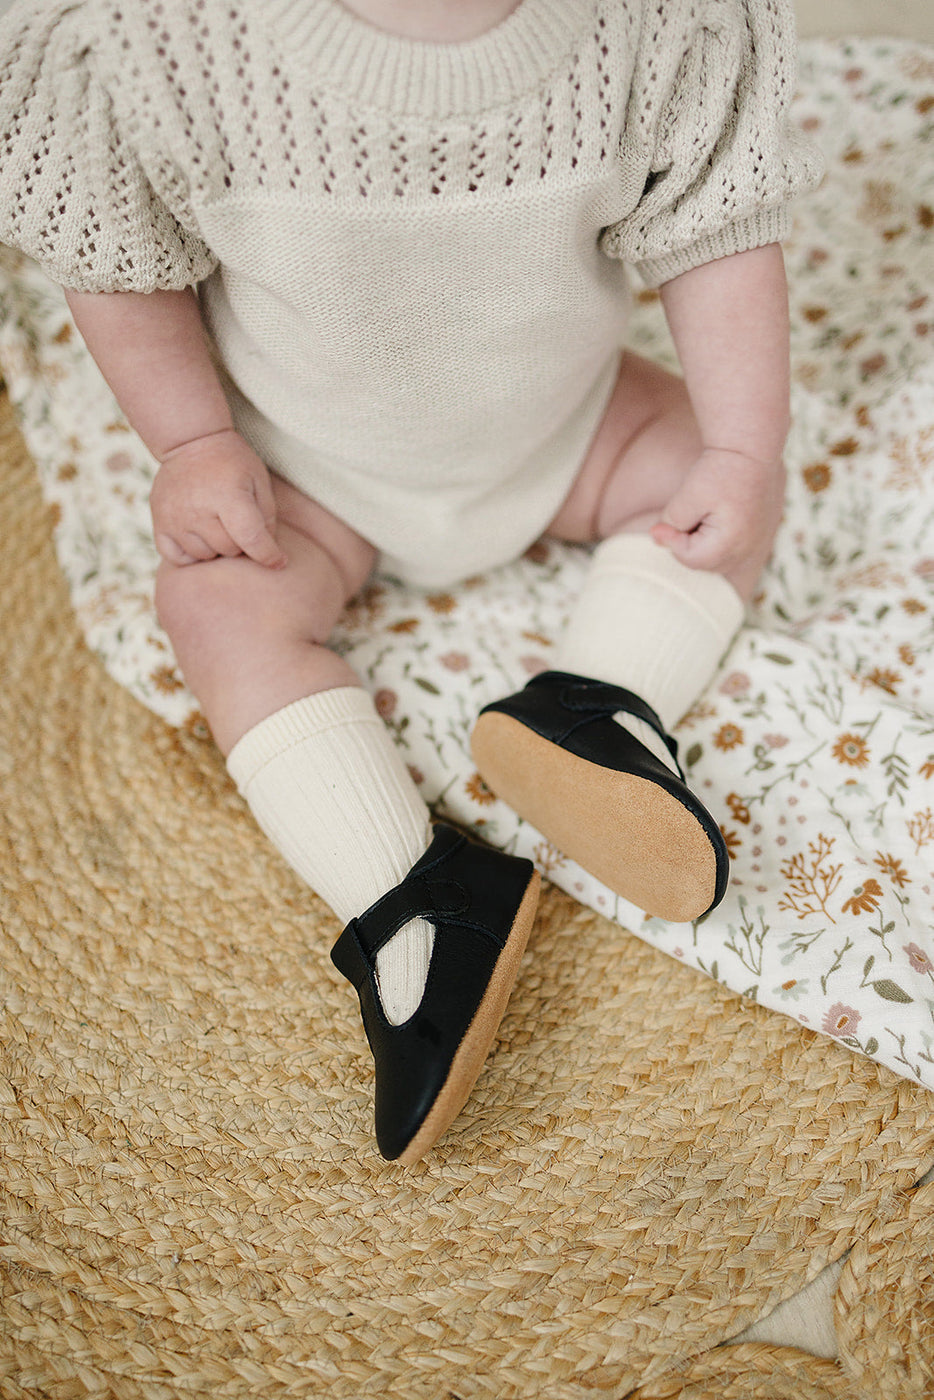 a baby wearing black shoes